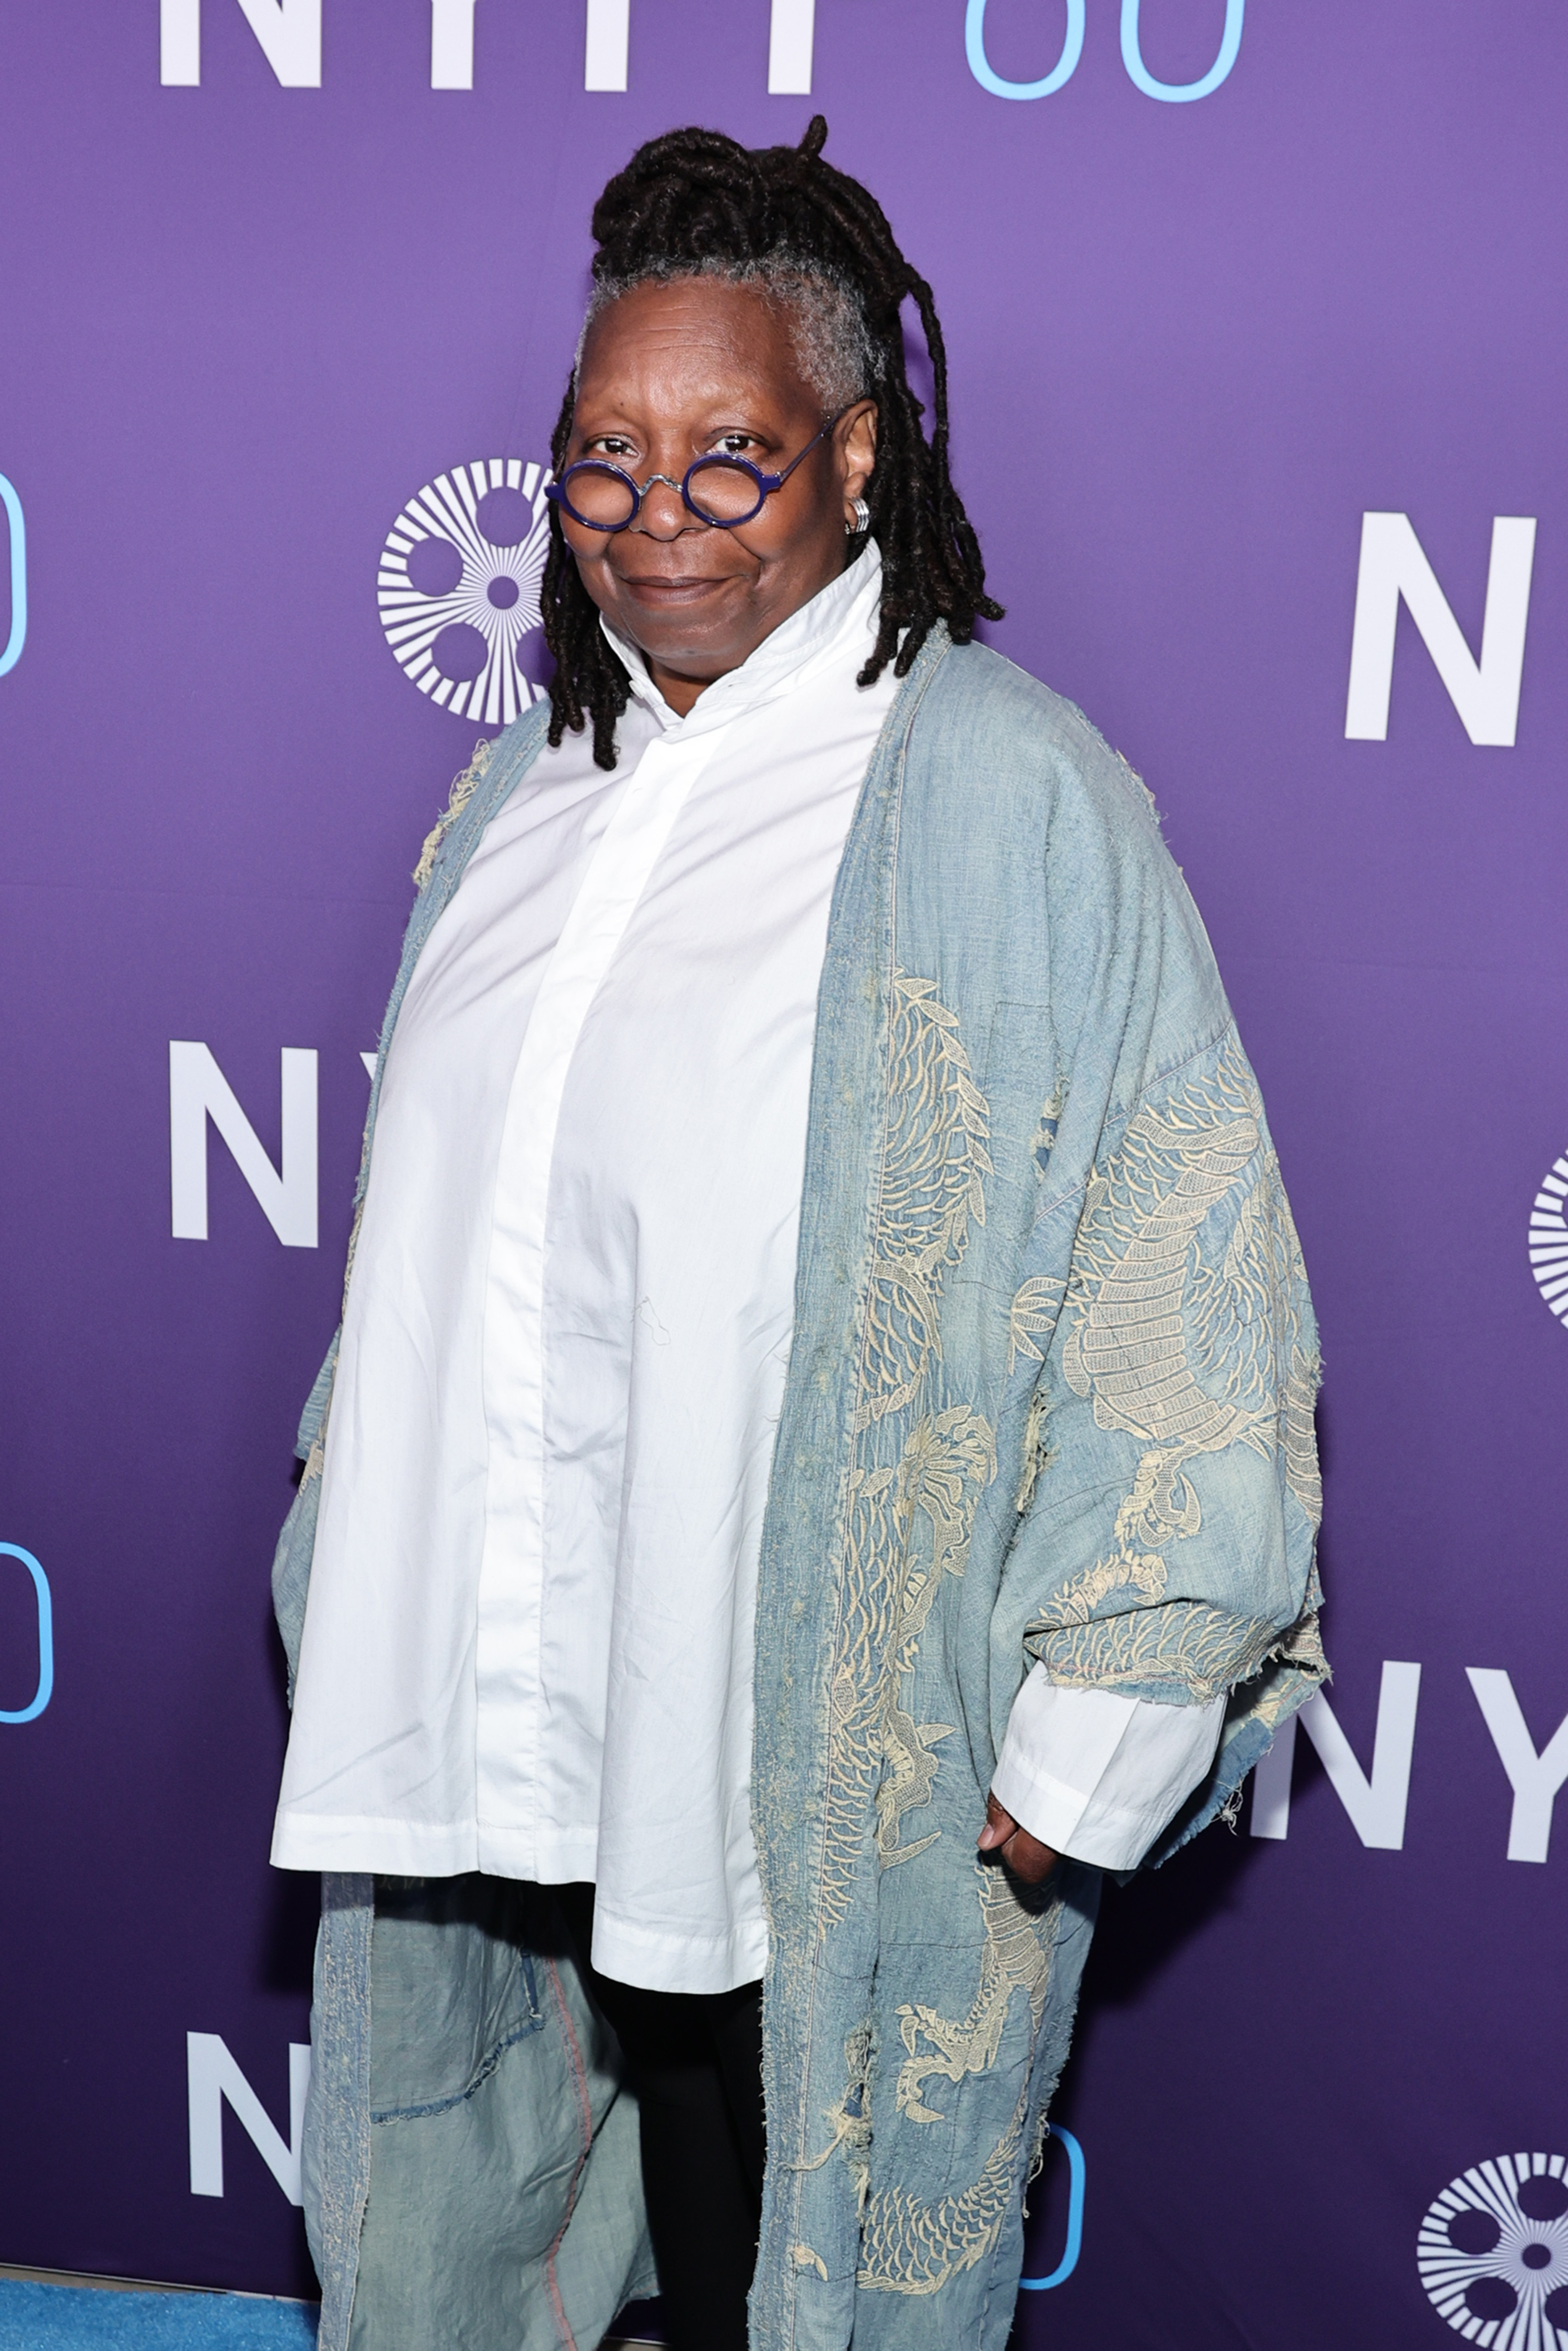 Whoopi Goldberg am 1. Oktober 2022 | Quelle: Getty Images